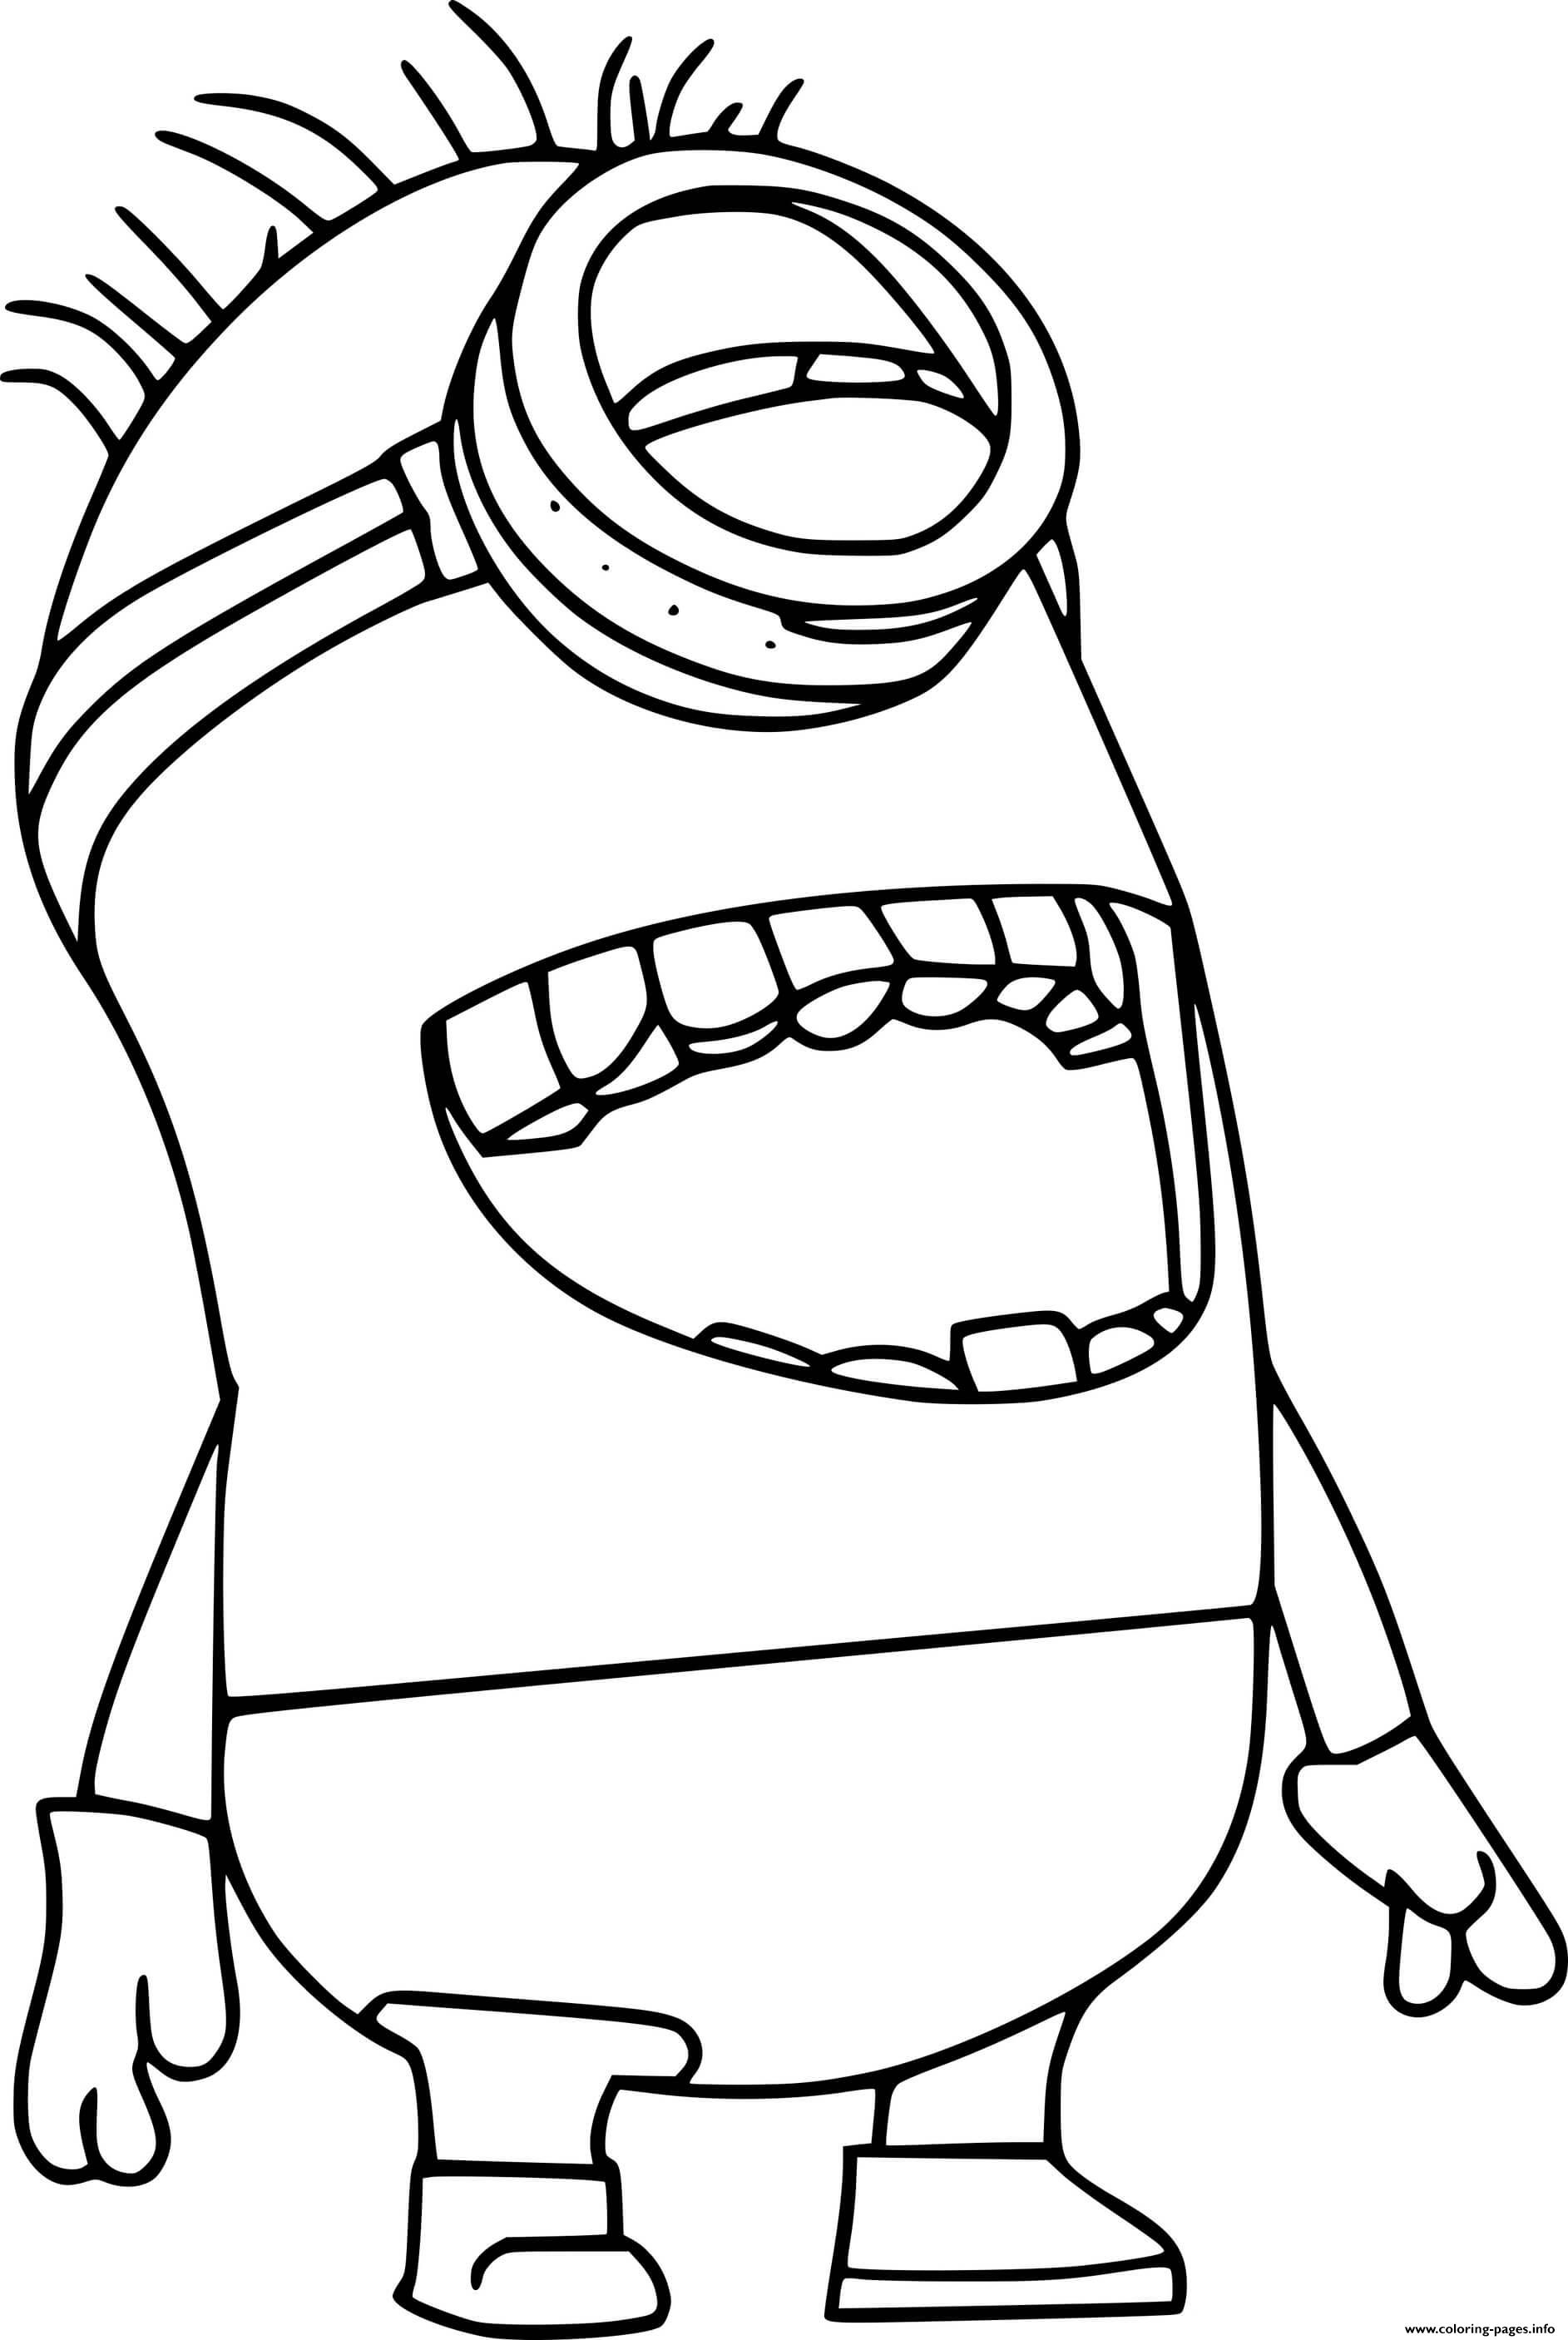 One Eye Minion Laughing coloring